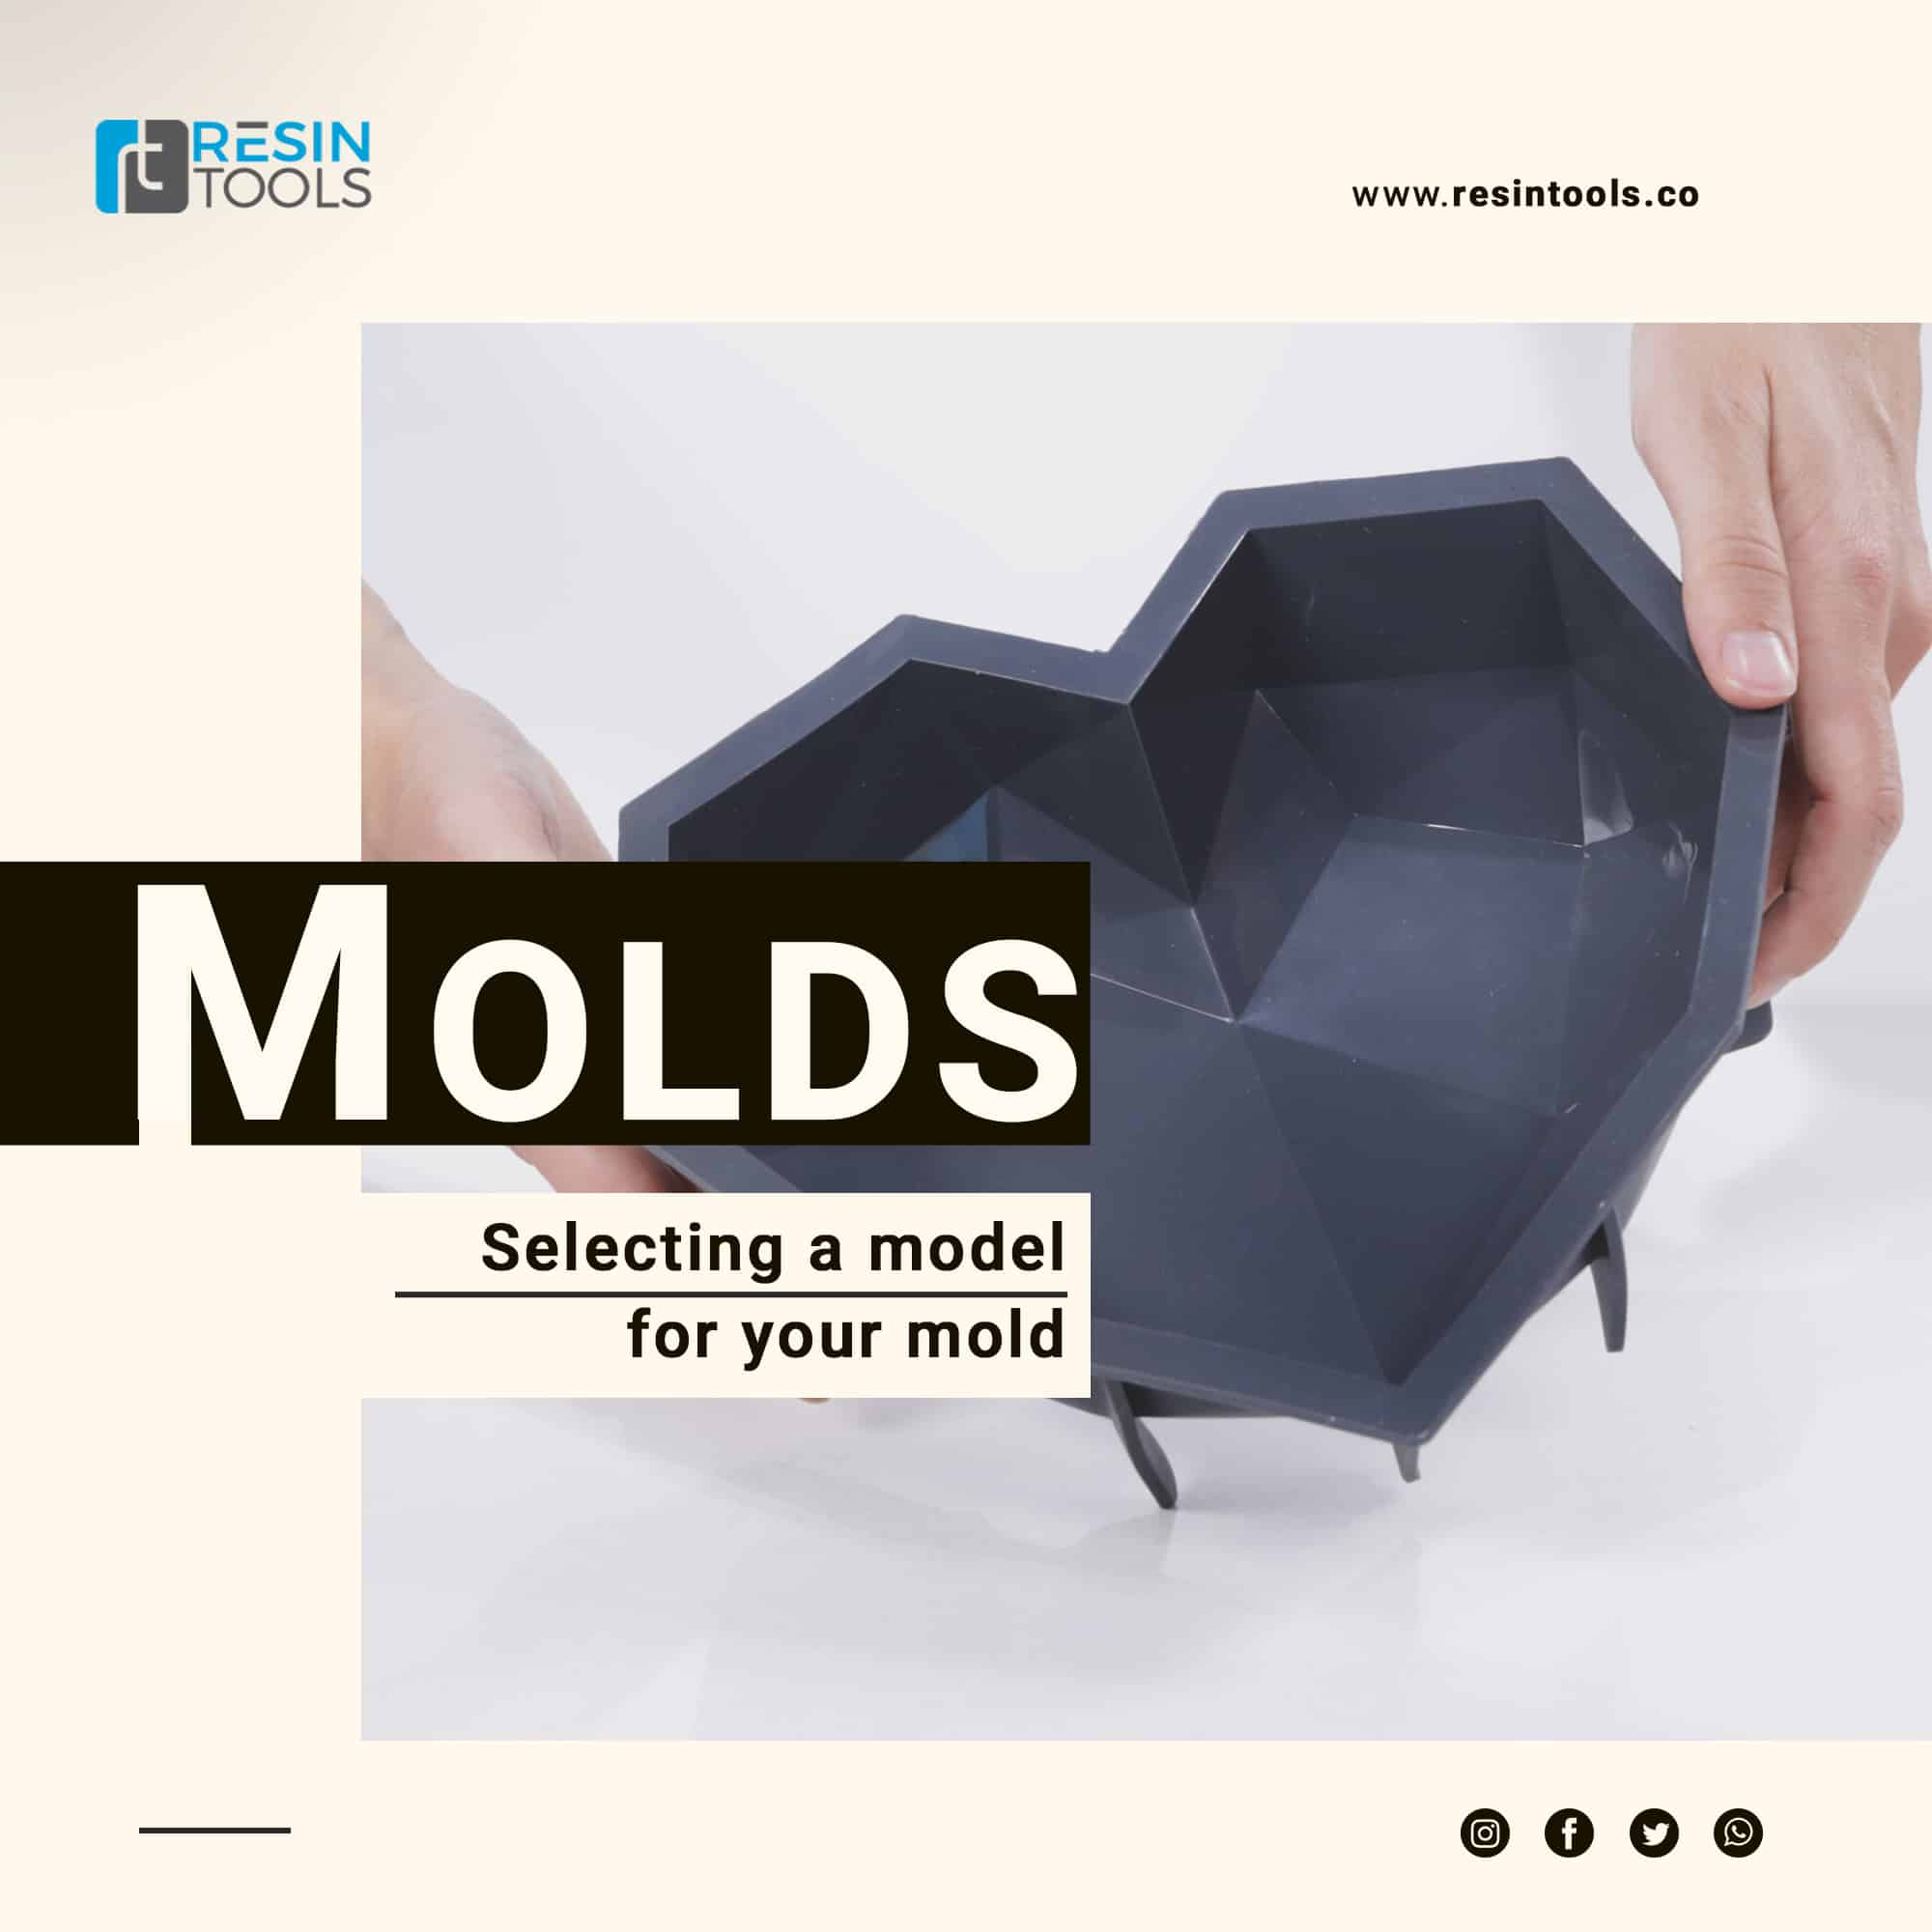 Selecting a model for your mold - resintools.co